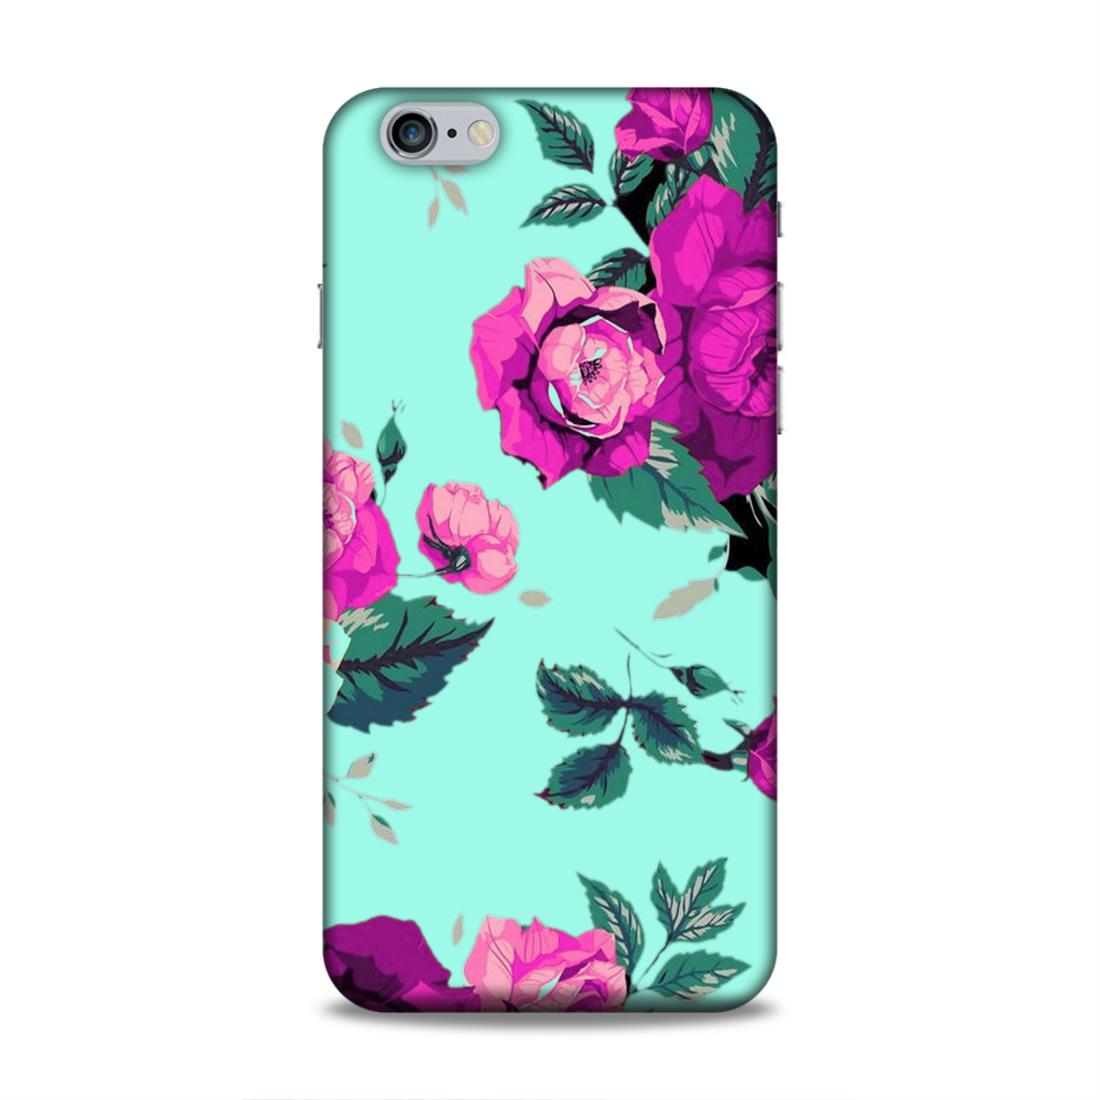 Pink Floral Hard Back Case For Apple iPhone 6 Plus / 6s Plus